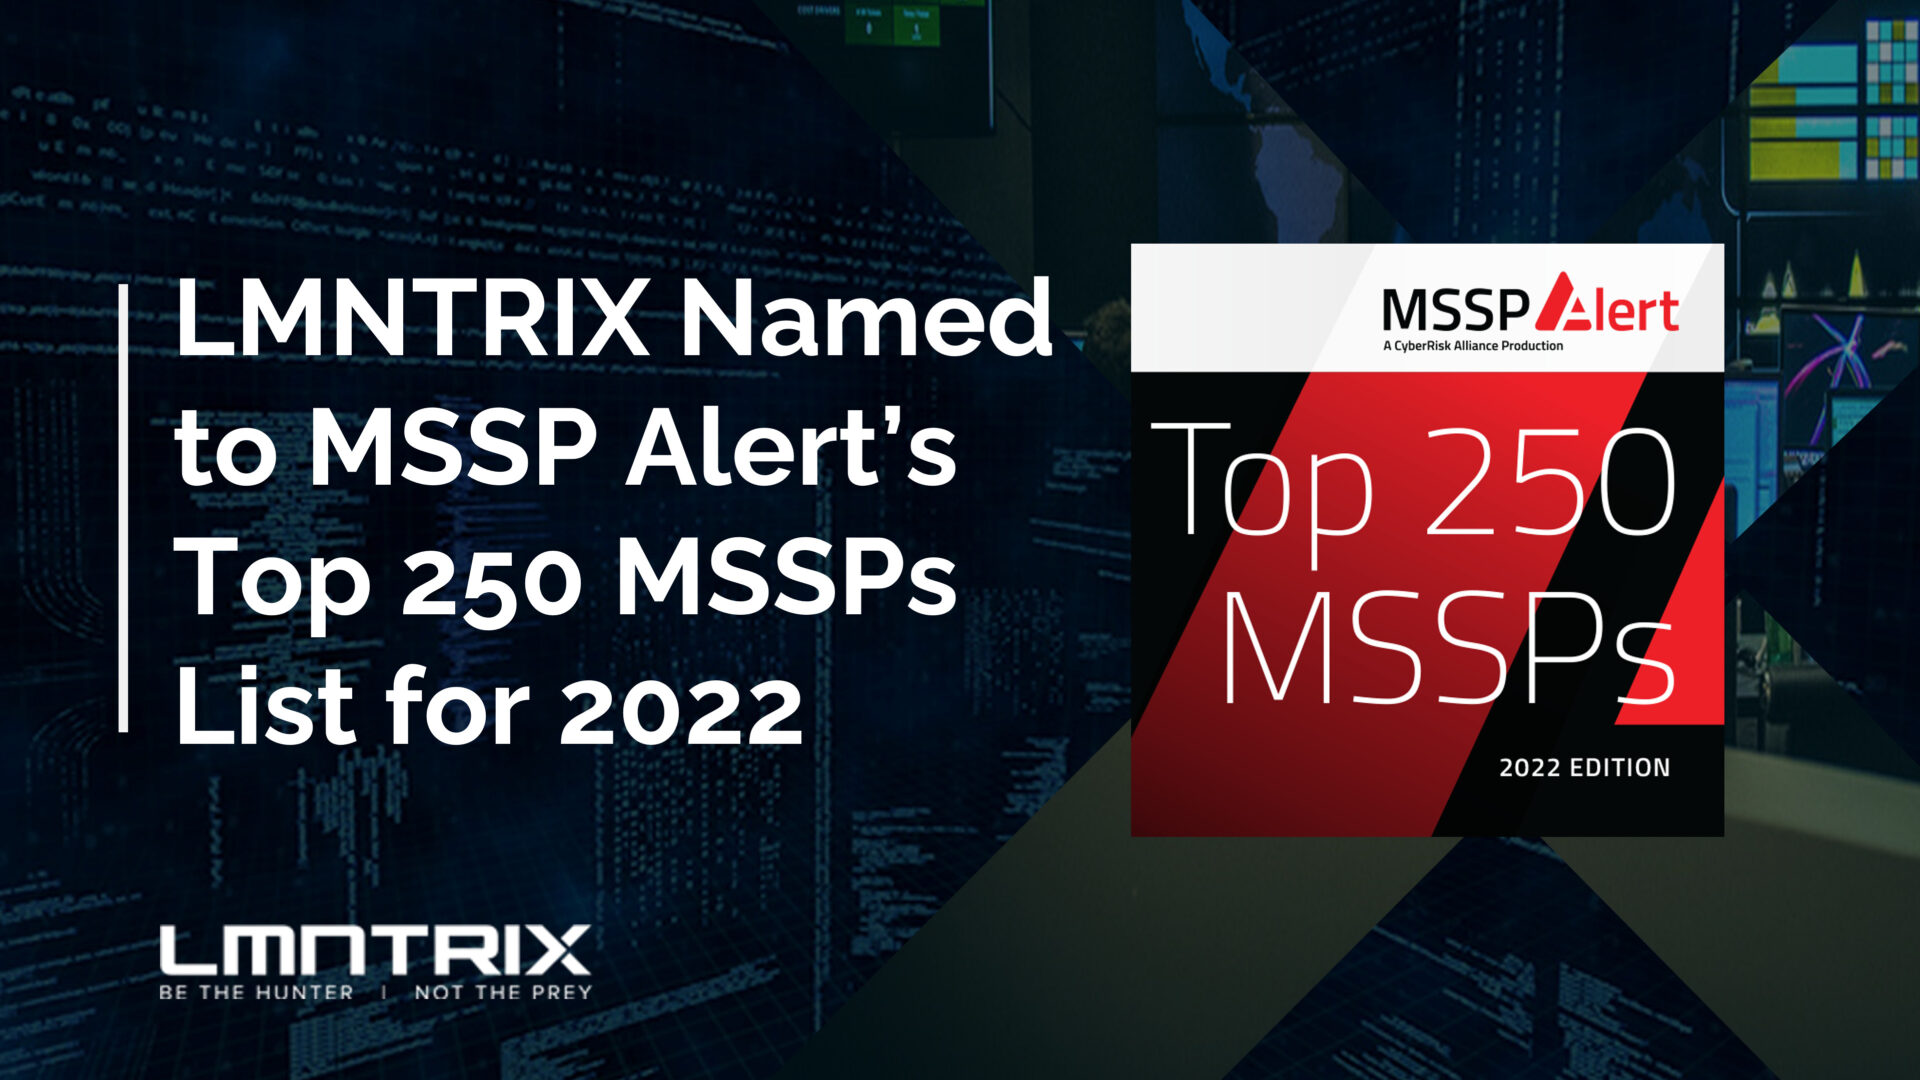 LMNTRIX has been named one of the Top 250 MSSP companies in the world, for the fourth year in a row.